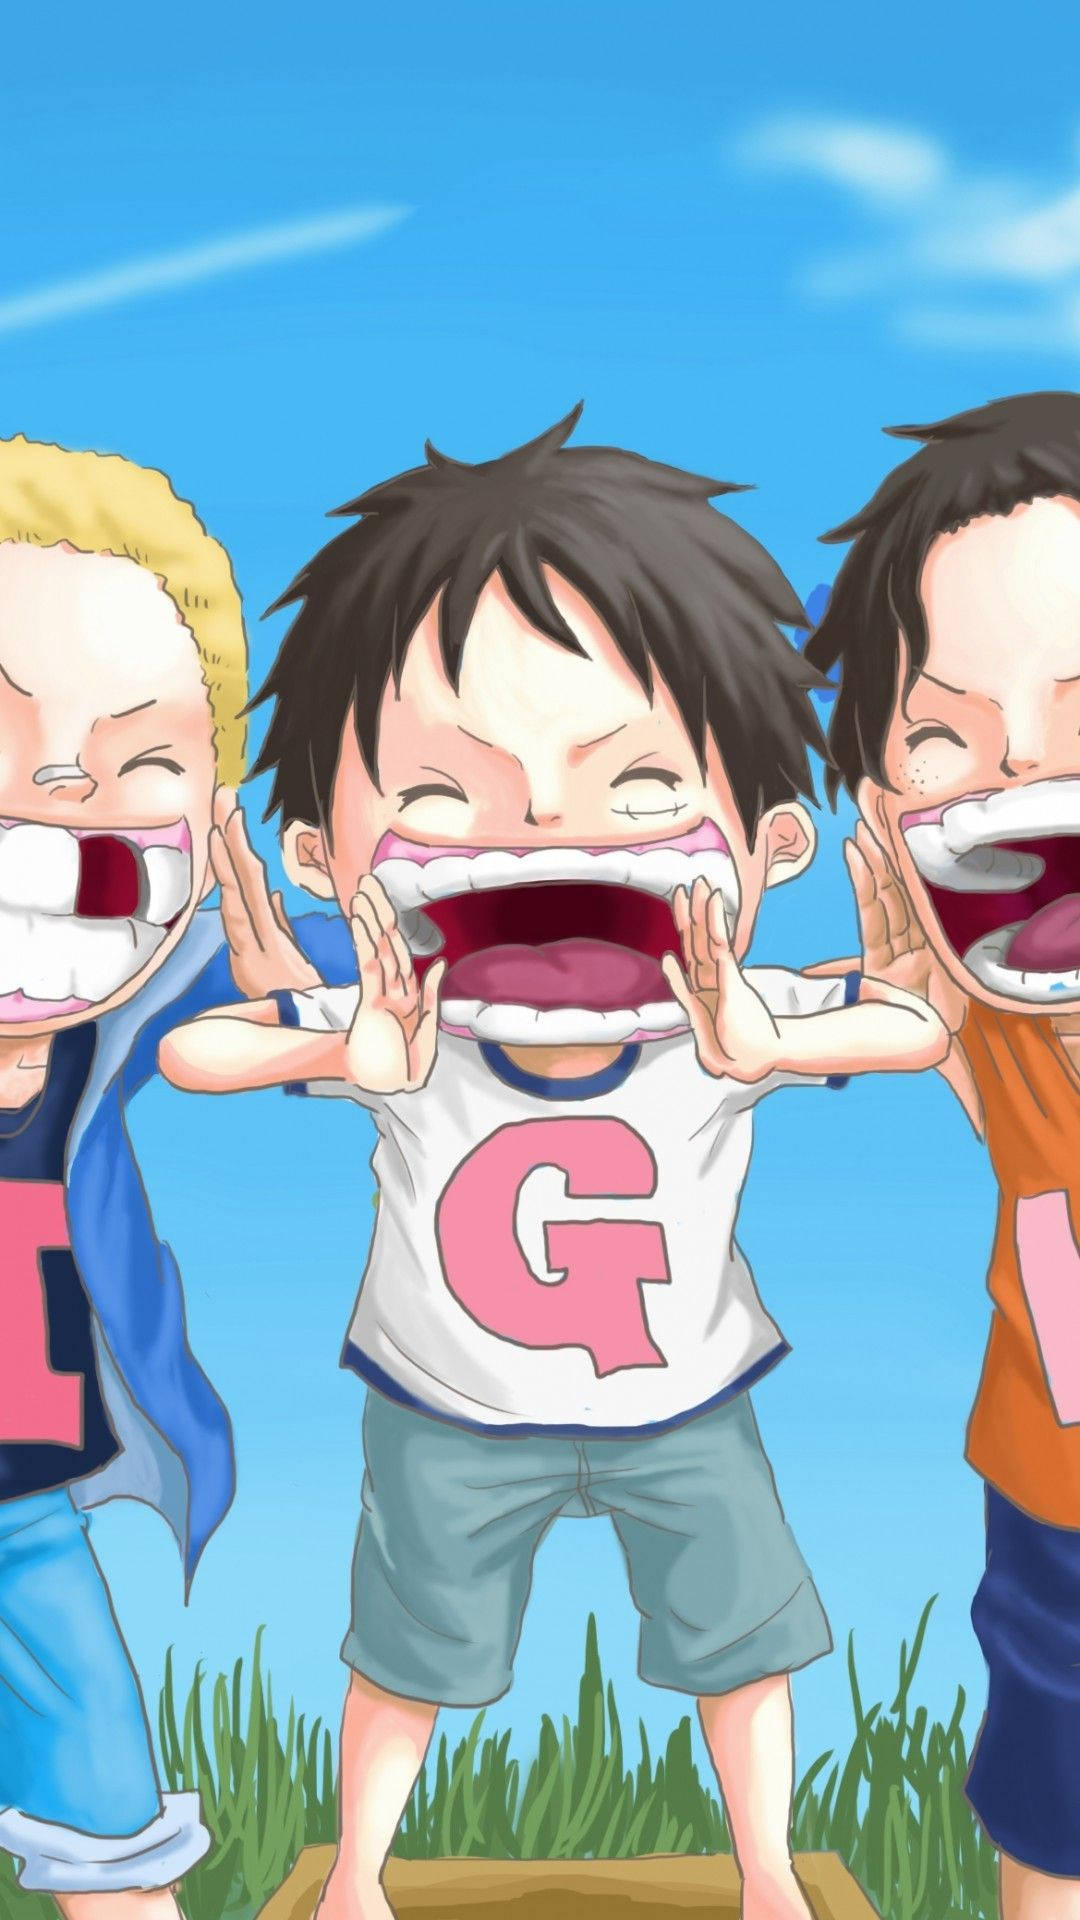 Little Luffy, Portgas D Ace and Sabo in One Piece anime wallpaper.